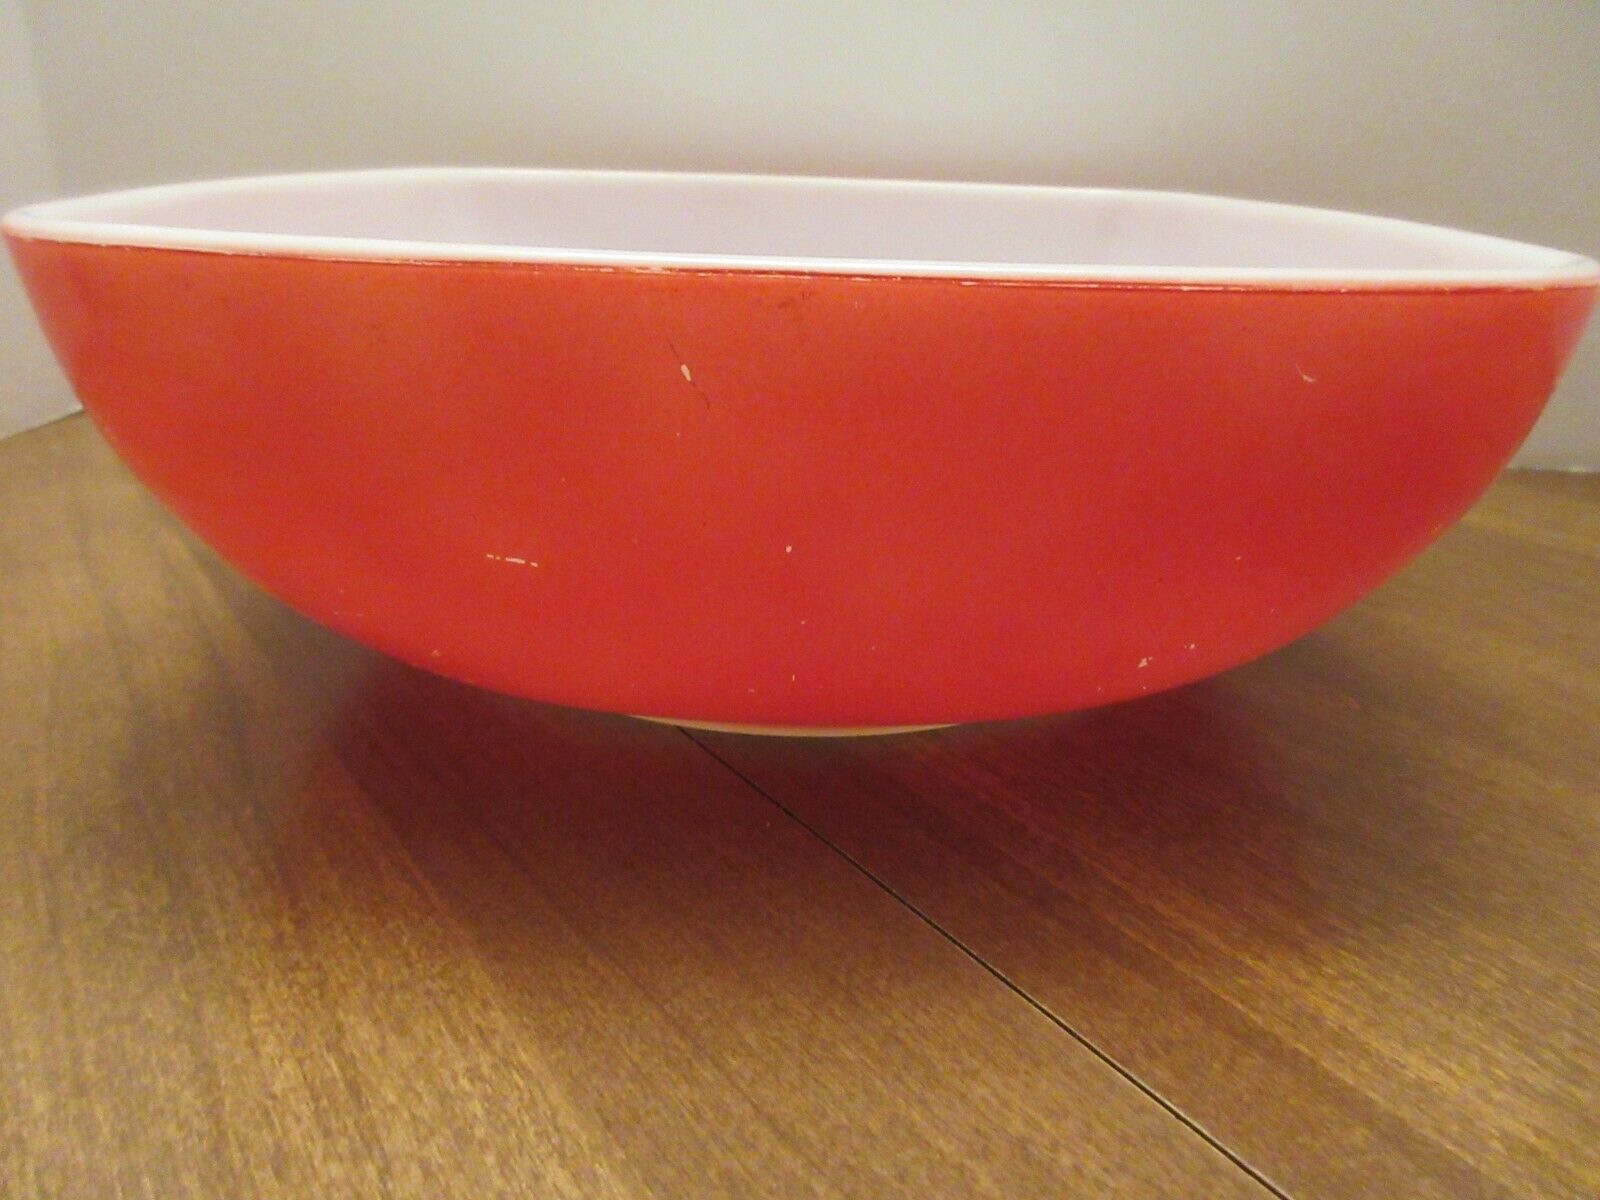 Vintage Pyrex Casserole Dish 2 1/2 Qt Red 525B-025 Oven Ware 9\